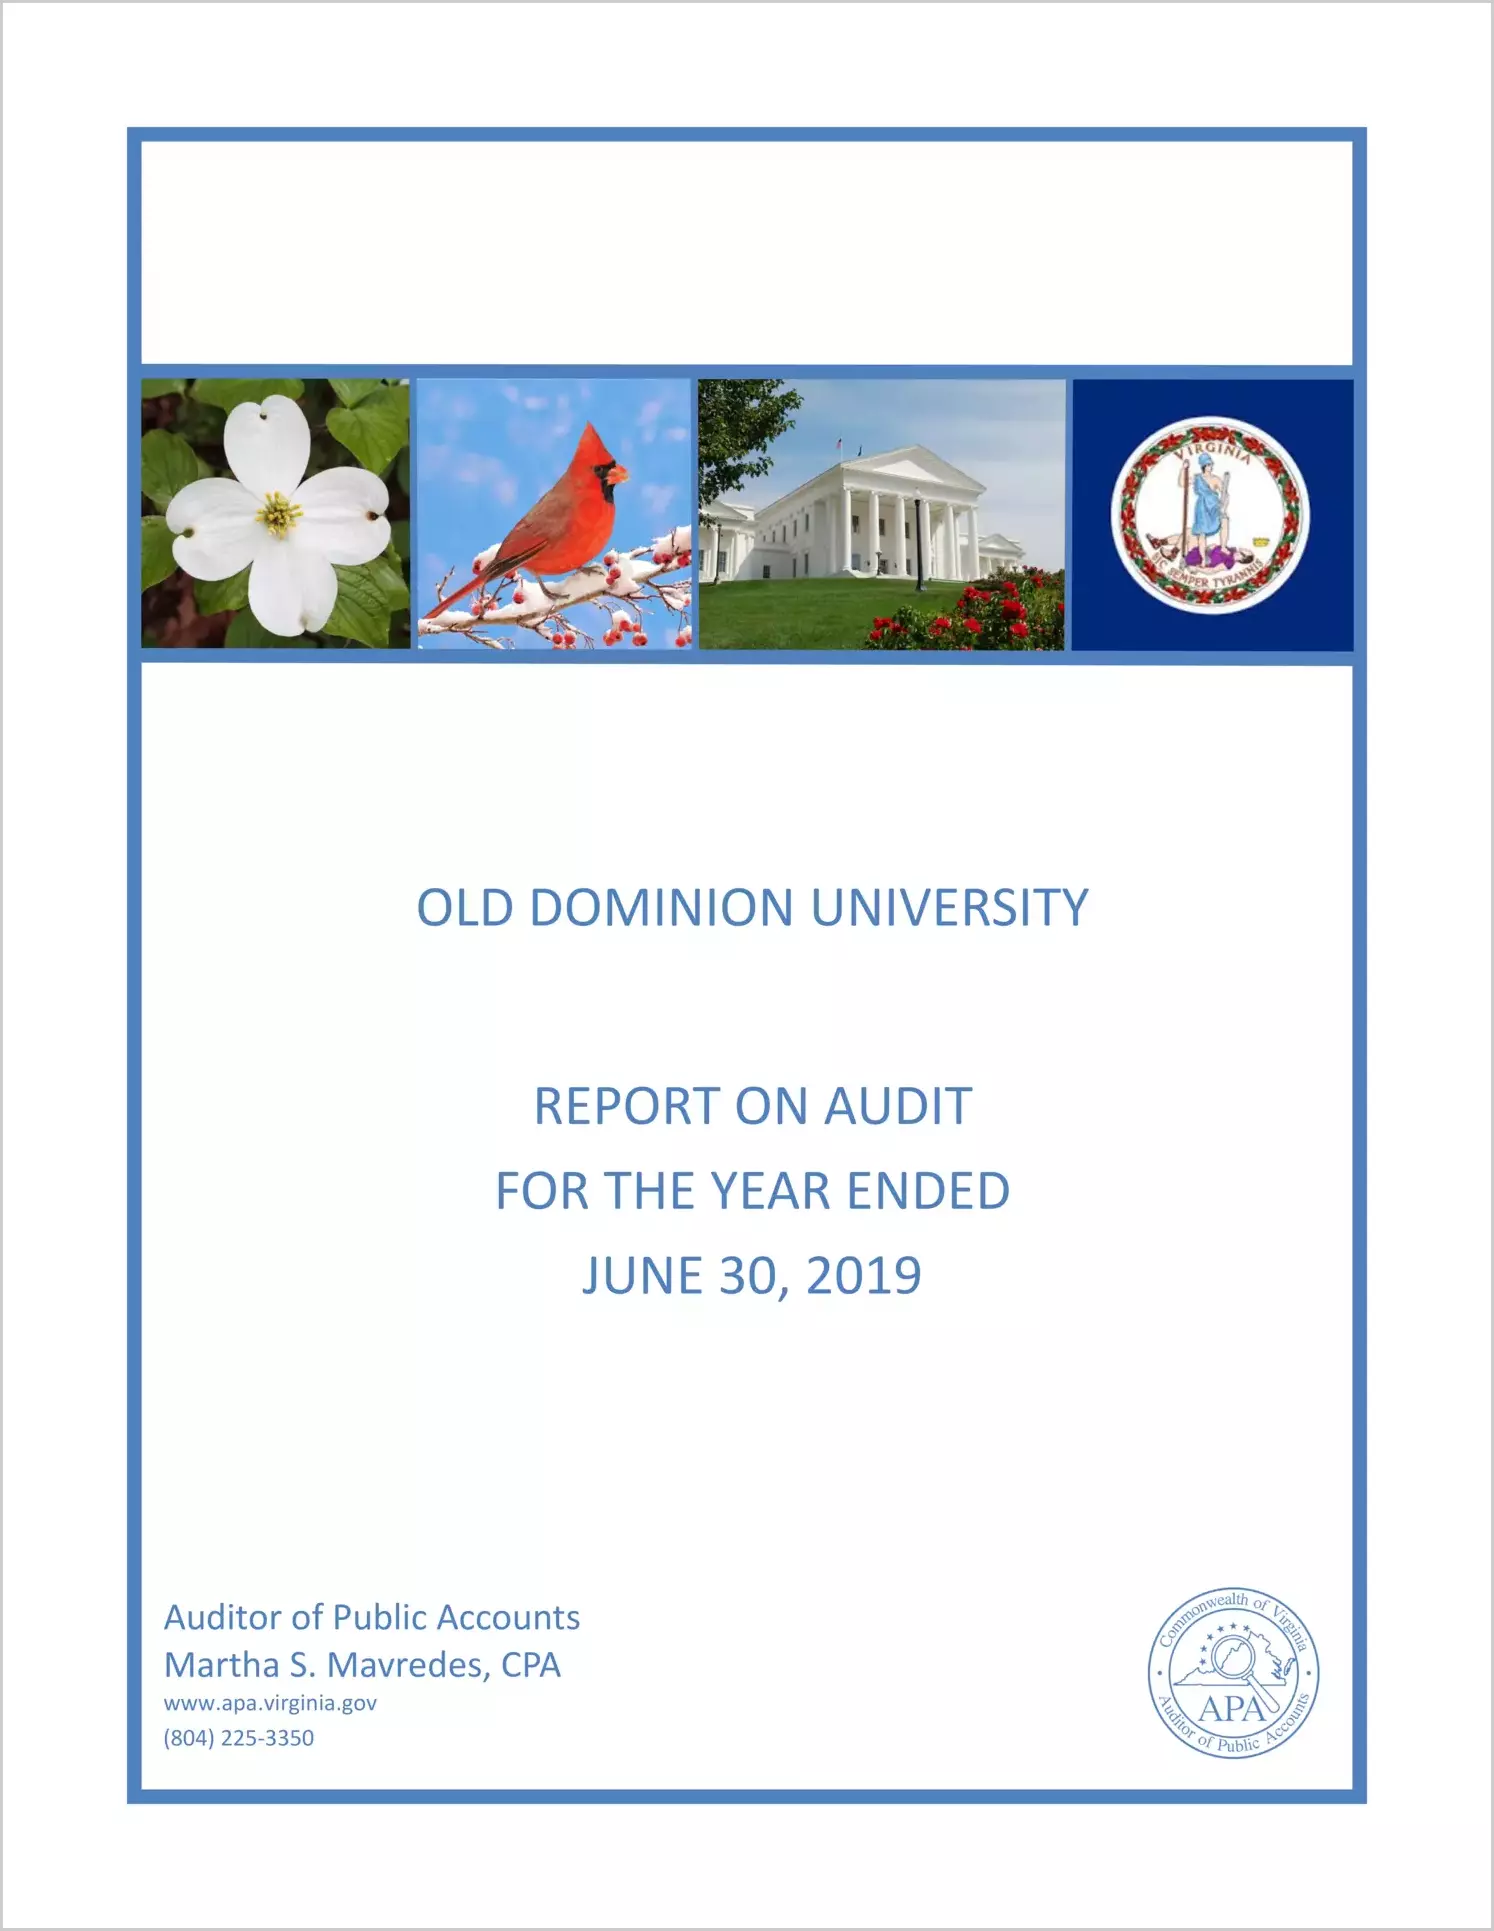 Old Dominion University for the year ended June 30, 2019